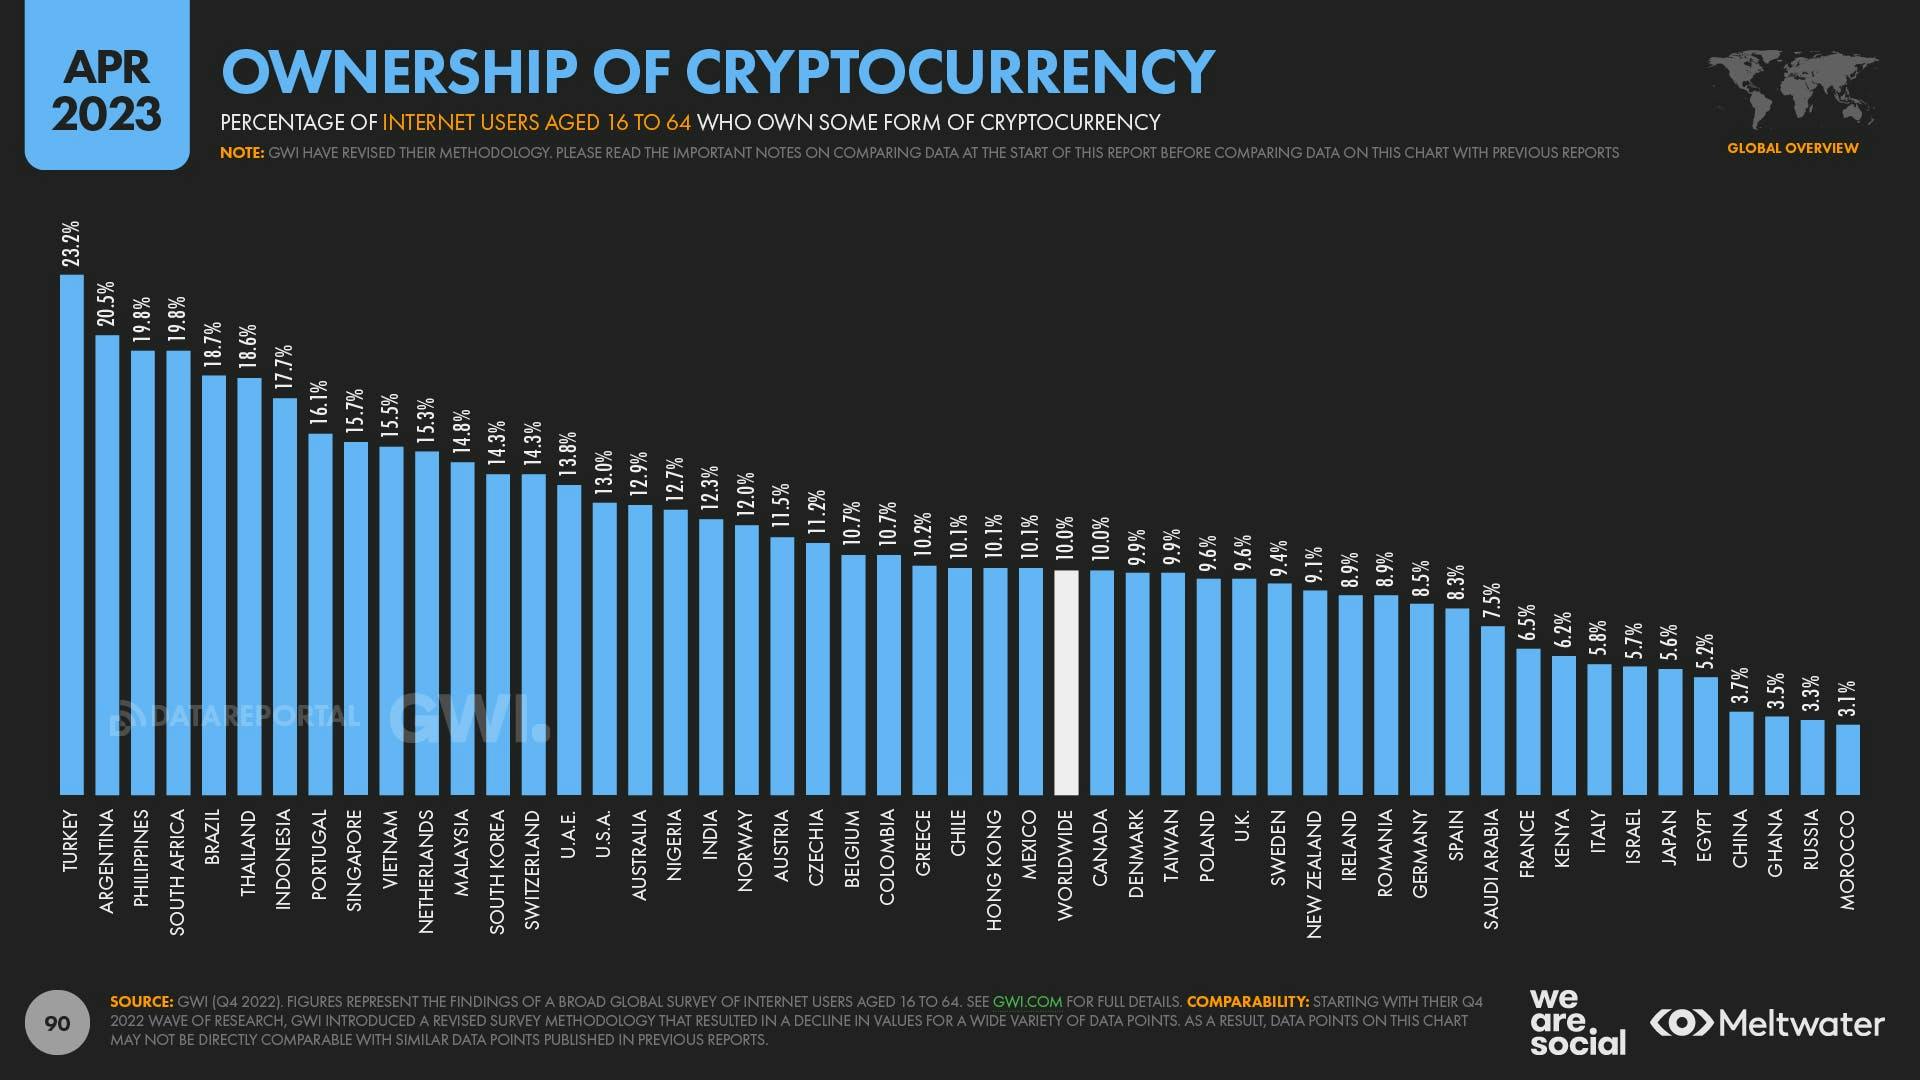 April 2023 Global State of Digital Report: Ownership of Cryptocurrency